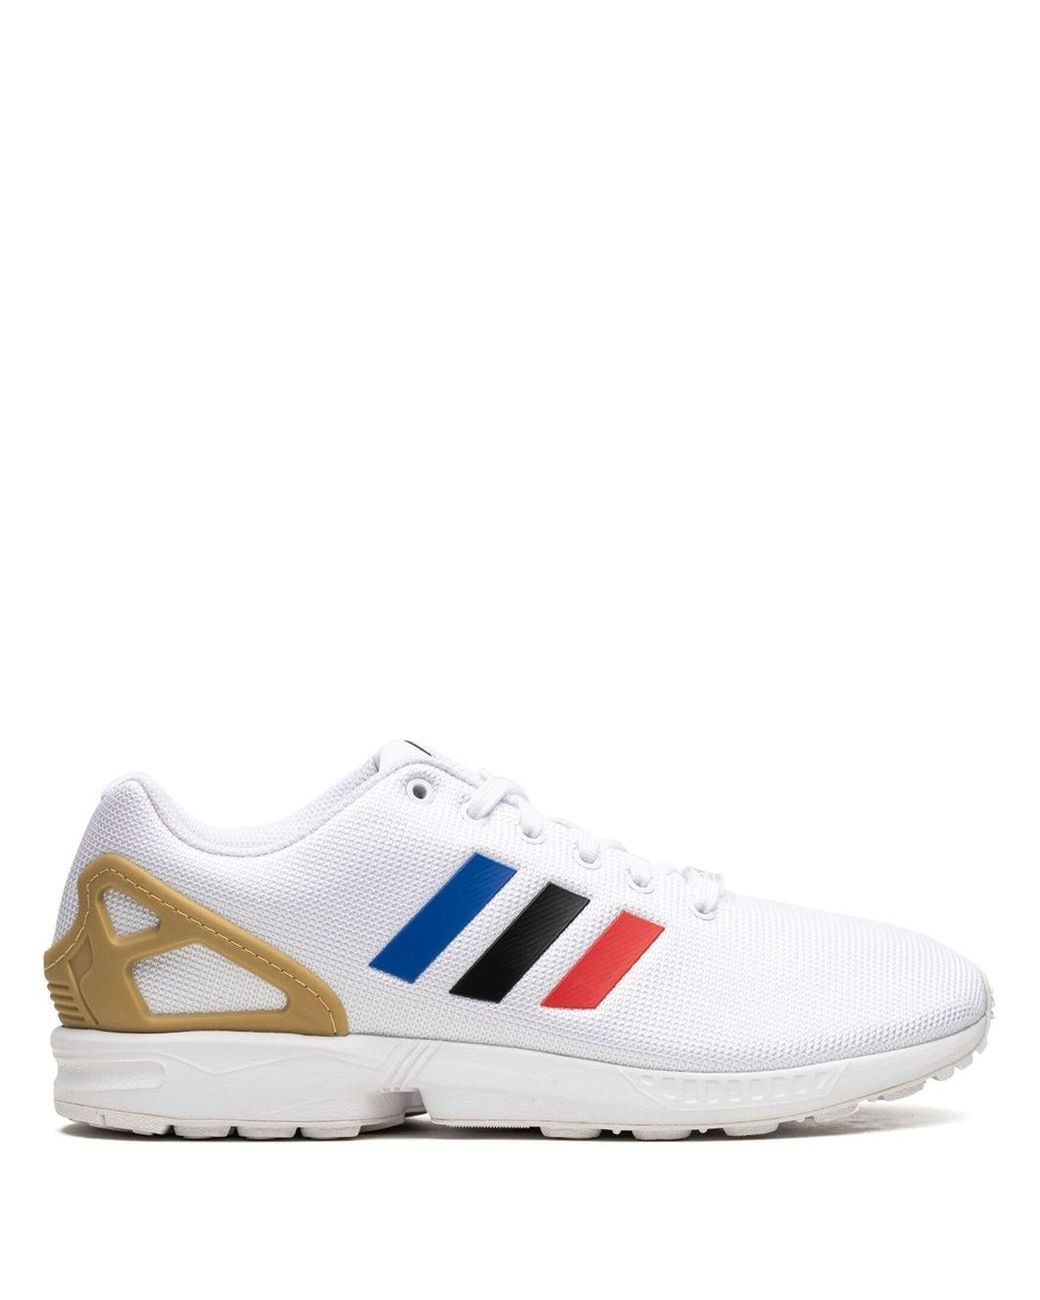 adidas Zx Flux "red/white/blue" Sneakers for Men | Lyst Australia